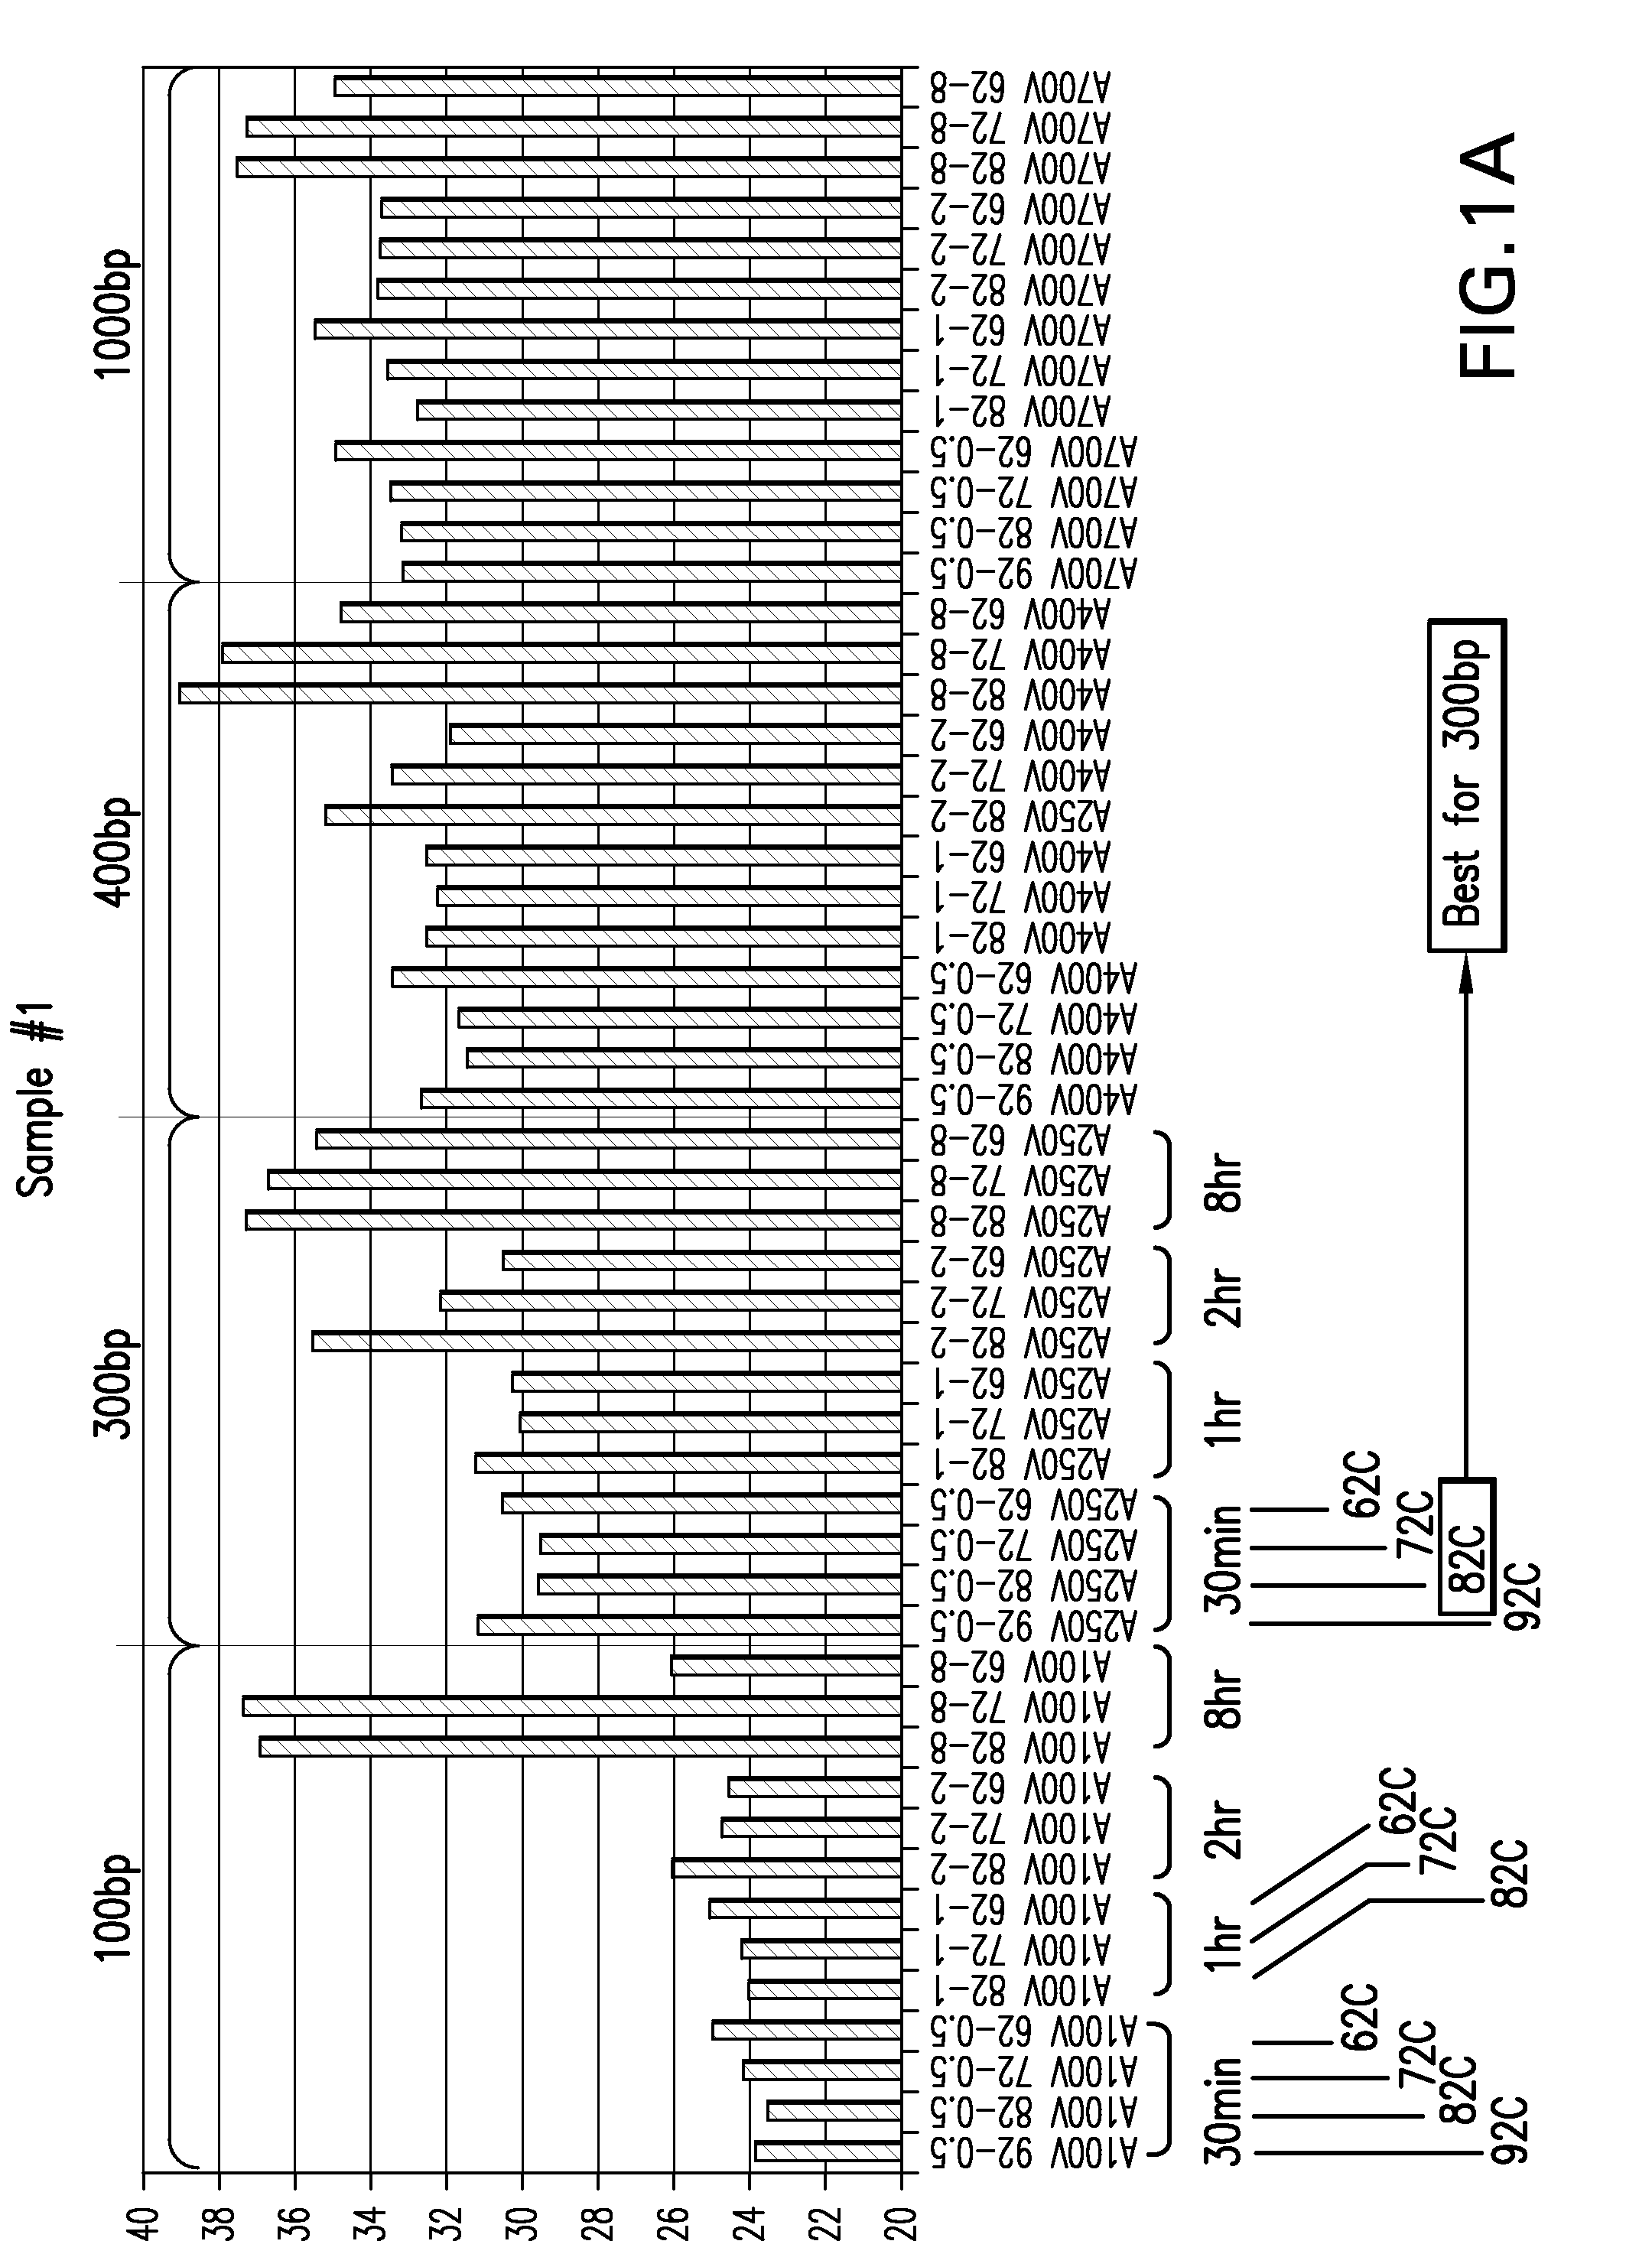 Methods for isolating long fragment RNA from fixed samples